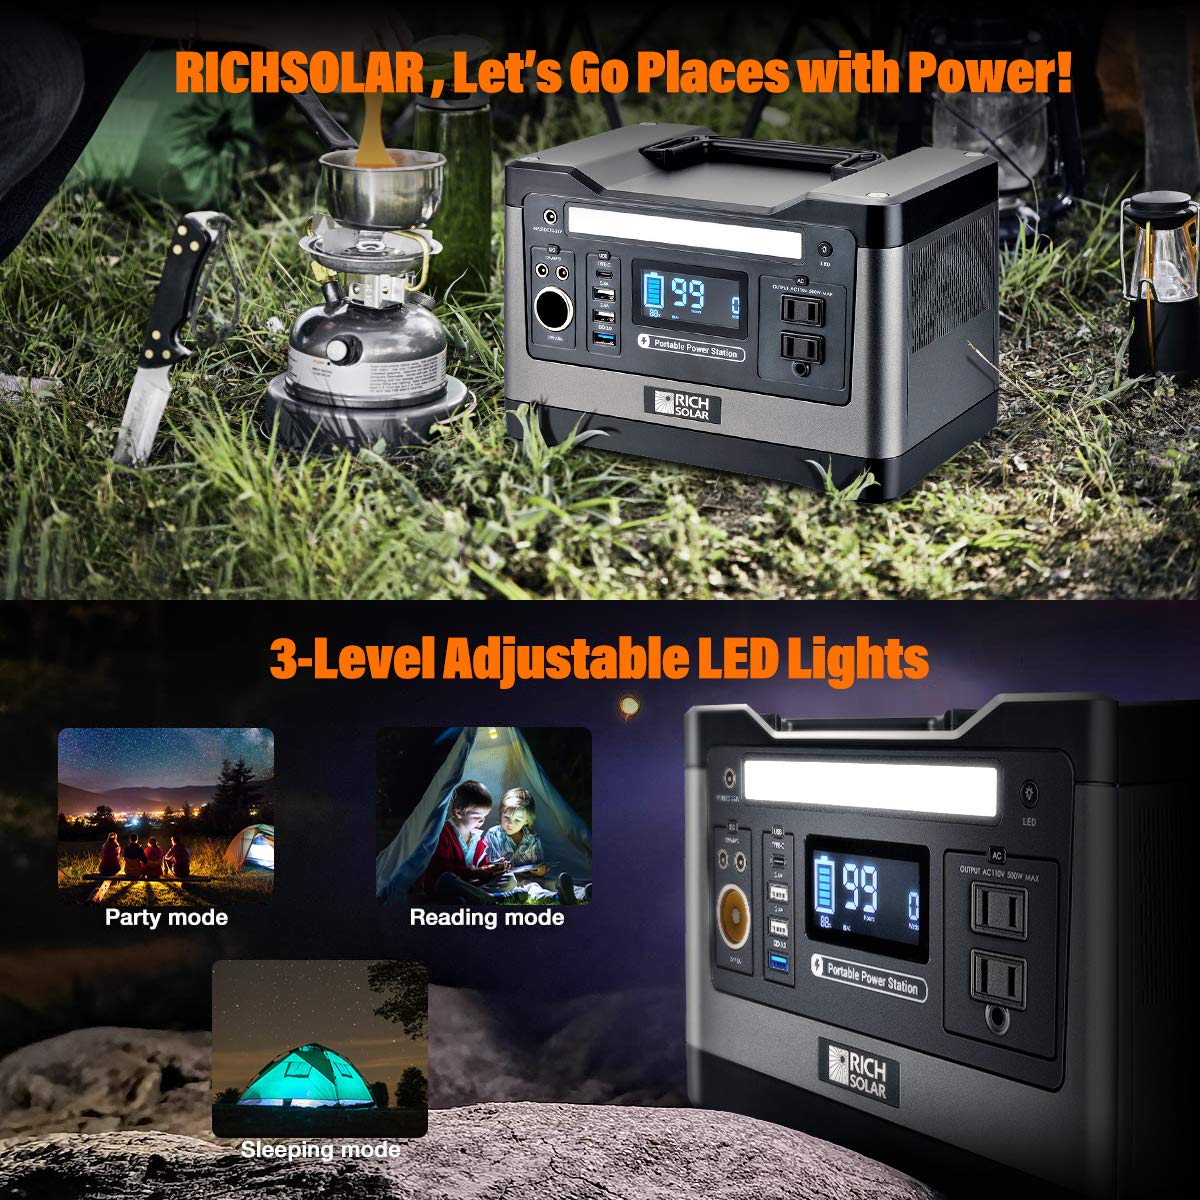 RICH SOLAR X500 Lithium Portable Power Station 540Wh Rechargeable Solar Generator Battery Backup Power for Camping Outdoors RV Emergency